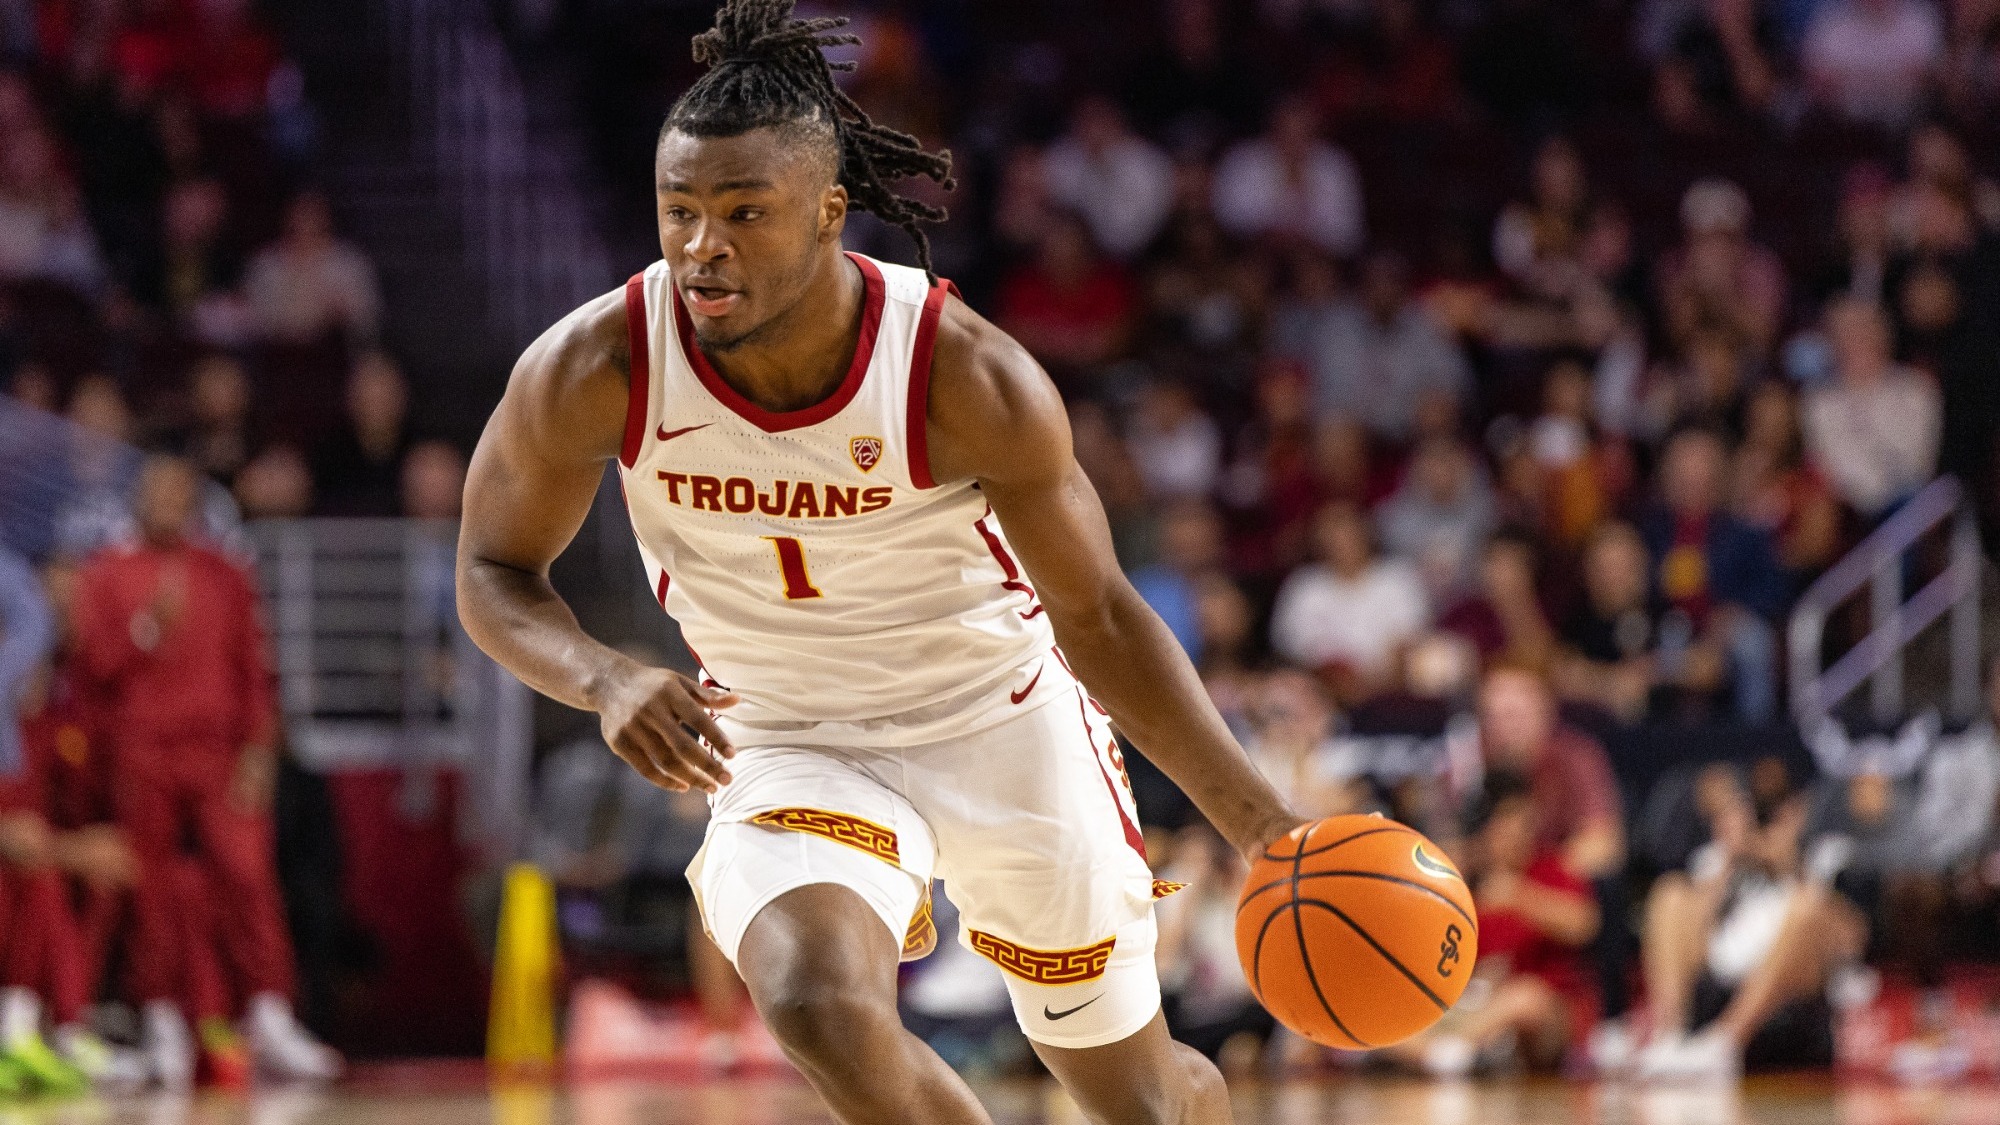 Rising USC Star Isaiah Collier Overcomes Adversity: A Look at His Inspiring Journey and NBA Prospects